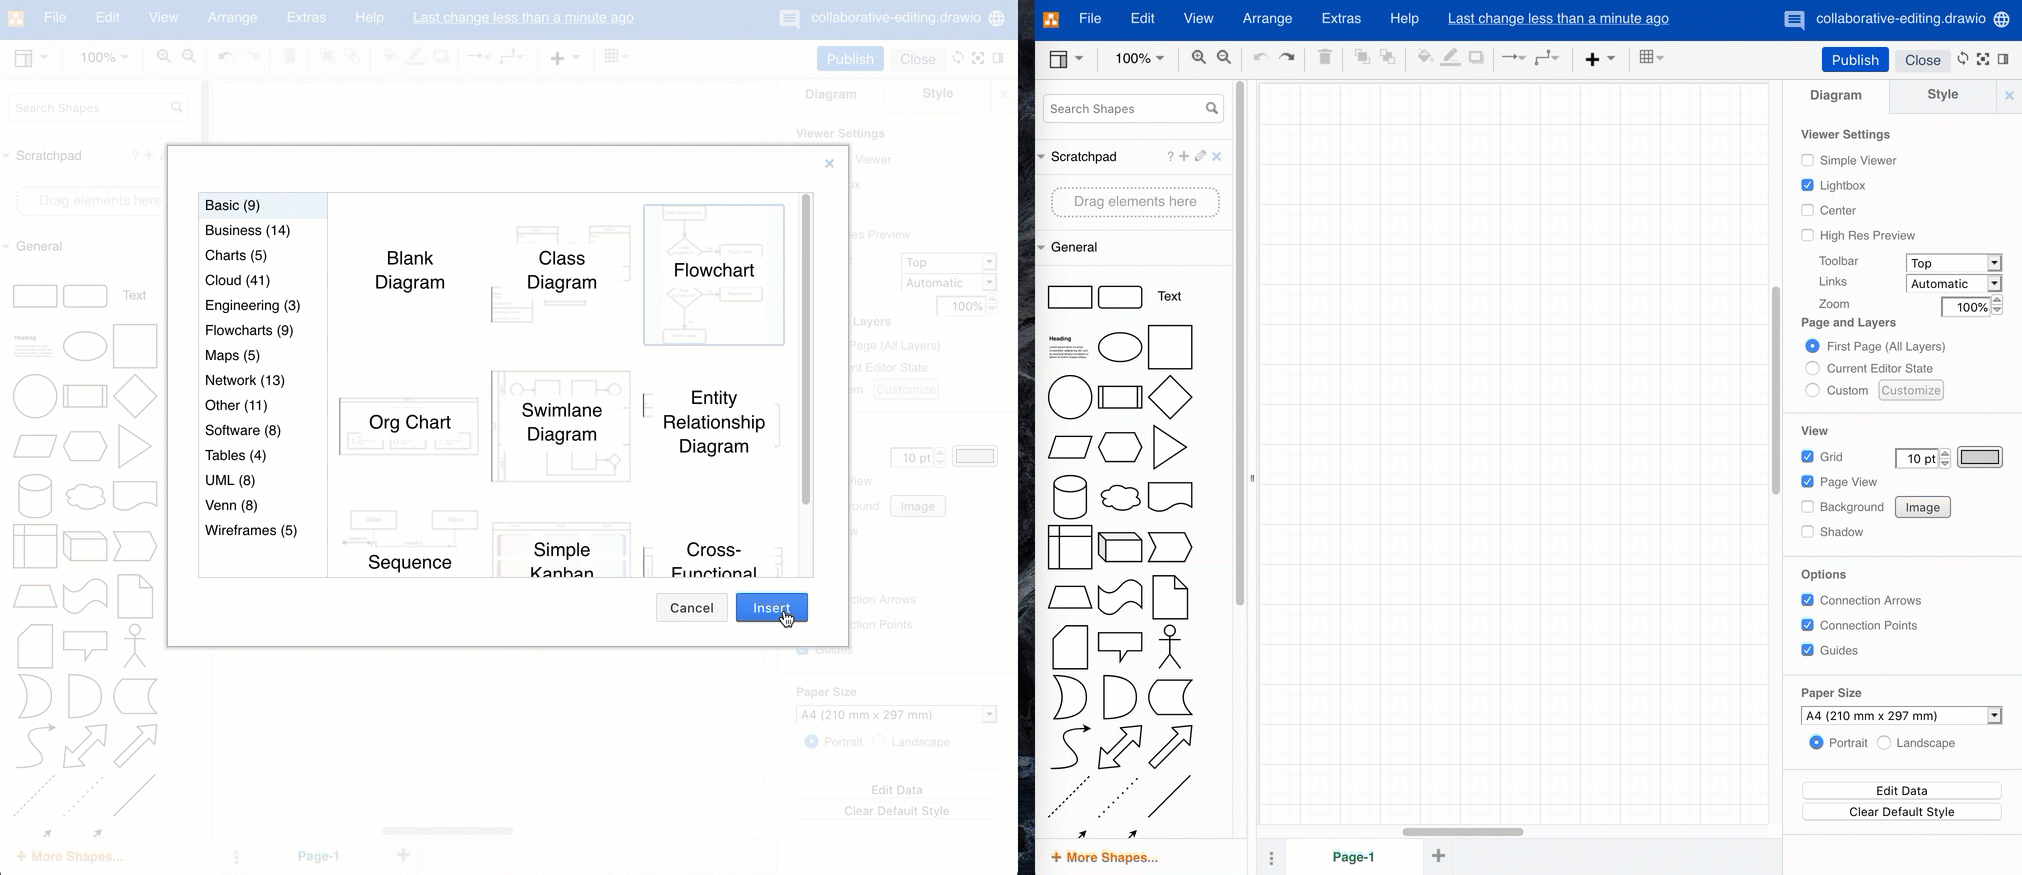 Two people editing the same diagram in draw.io for Confluence Cloud will see each others' changes as they are auto-saved